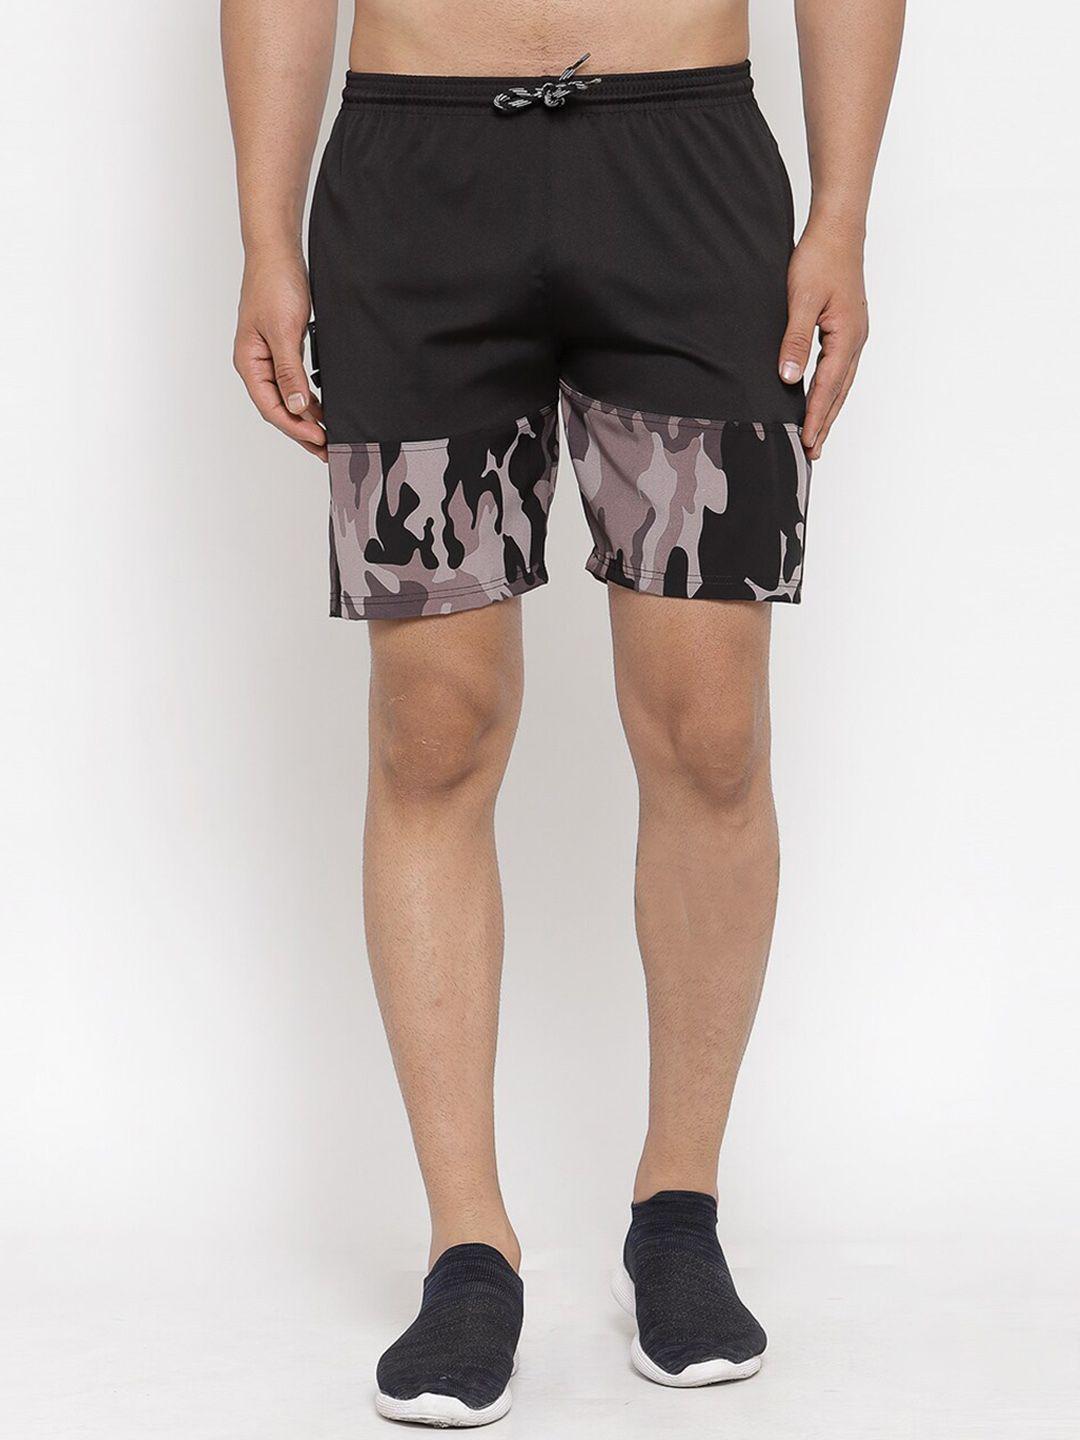 klotthe camouflage printed rapid dry sports shorts